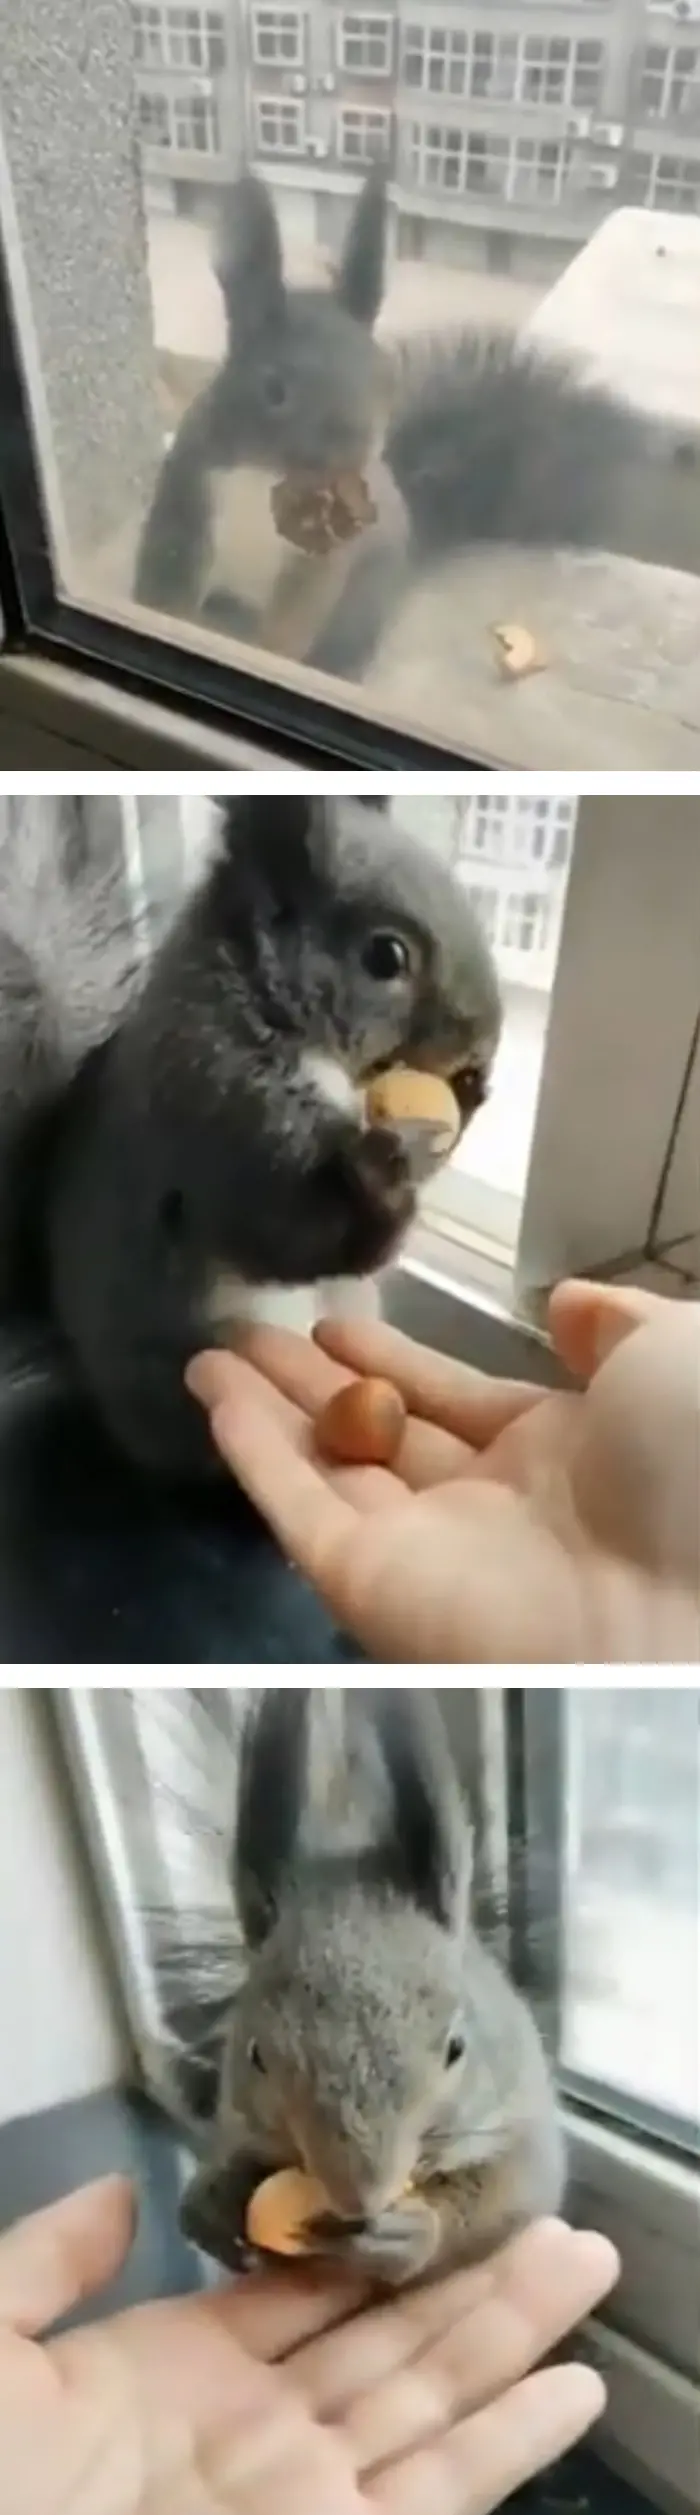 rodent trading dried leaf for fresh nuts